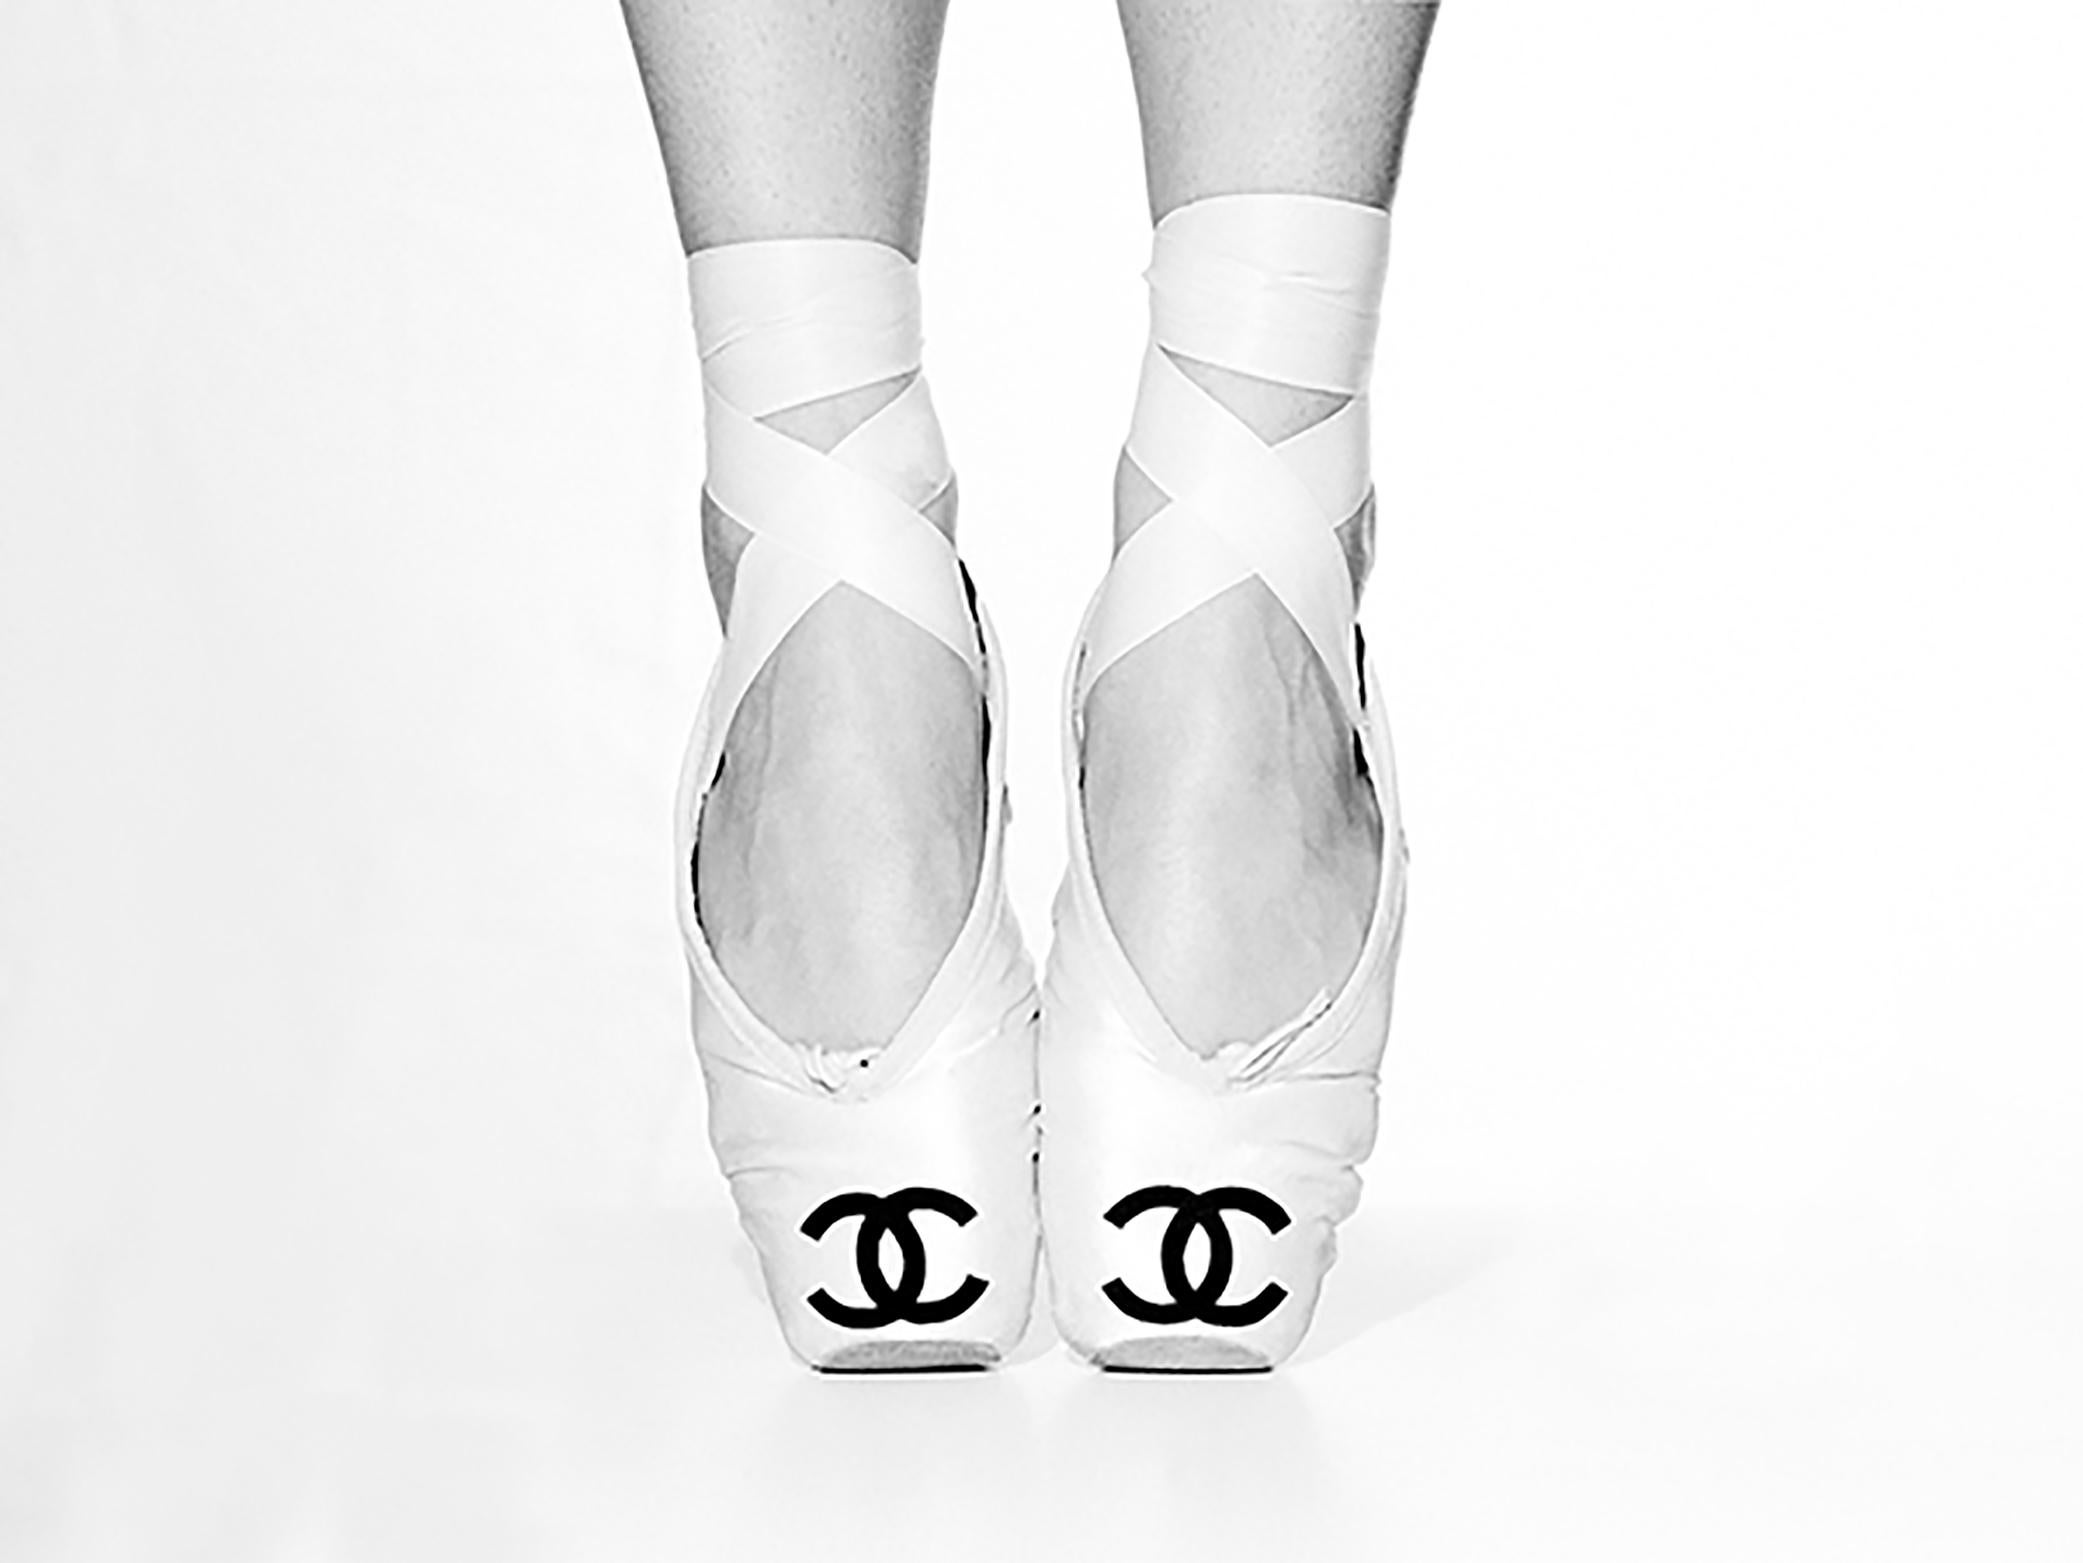 Tyler Shields, 'Chanel Ballet', 2014
Medium: C-type Photographic Print
22.5 x 30 "
Signature: Signed Certificate of Authenticity
Edition of 3 plus 2 AP's
Other sizes available
Contemporary Art Photography

Art Info calls Tyler Shields “Hollywood’s